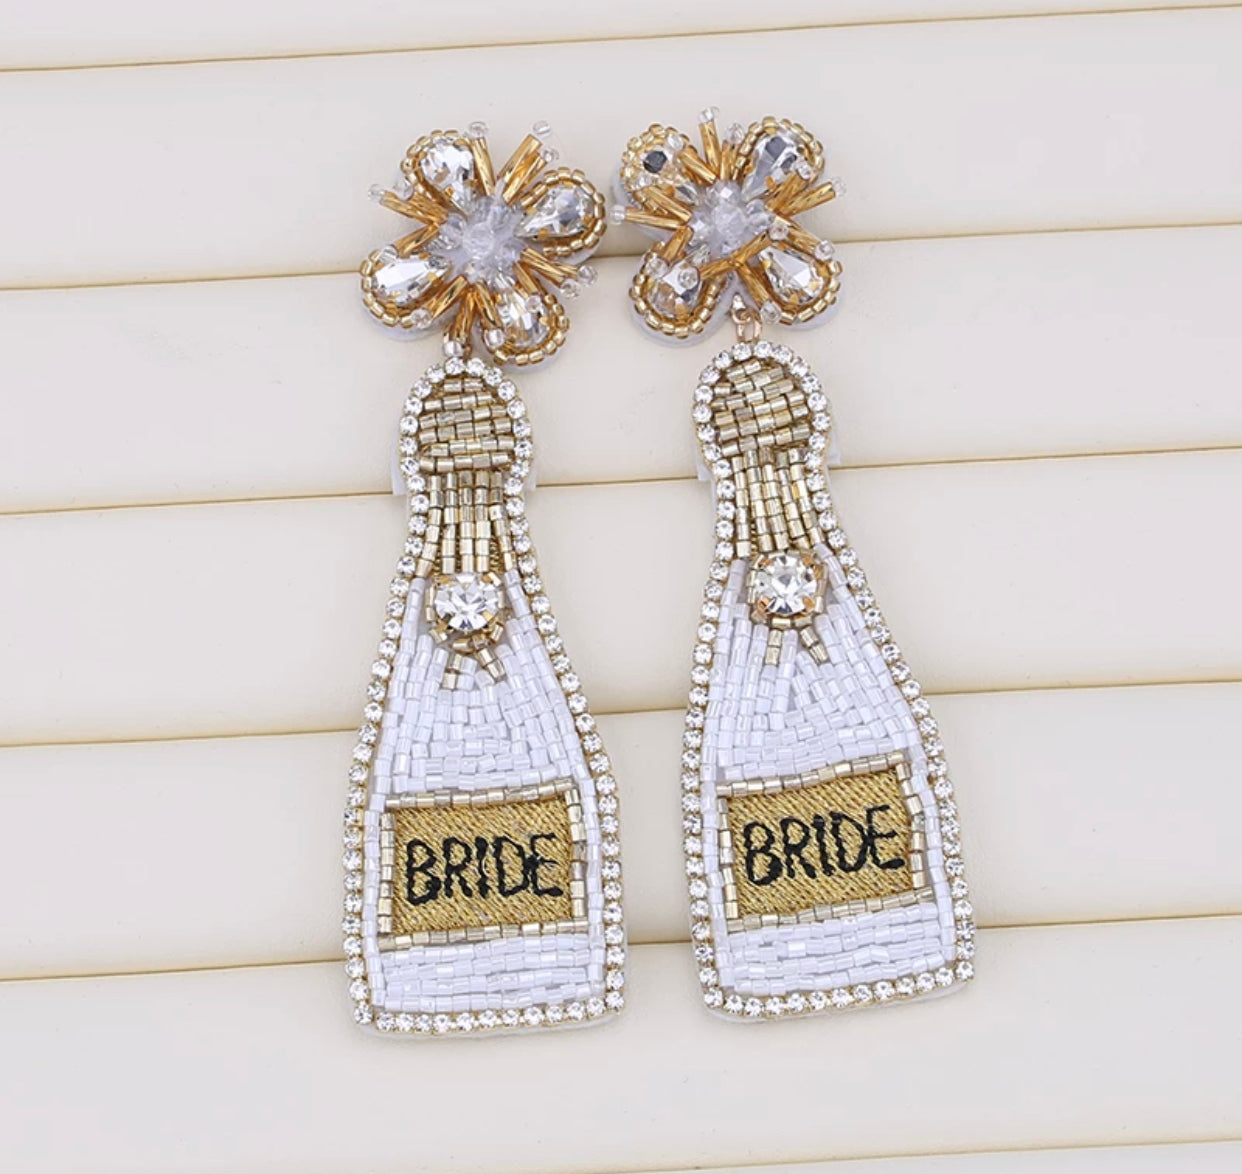 Beaded Bridal Shower Earrings with CZ Pave Embellished